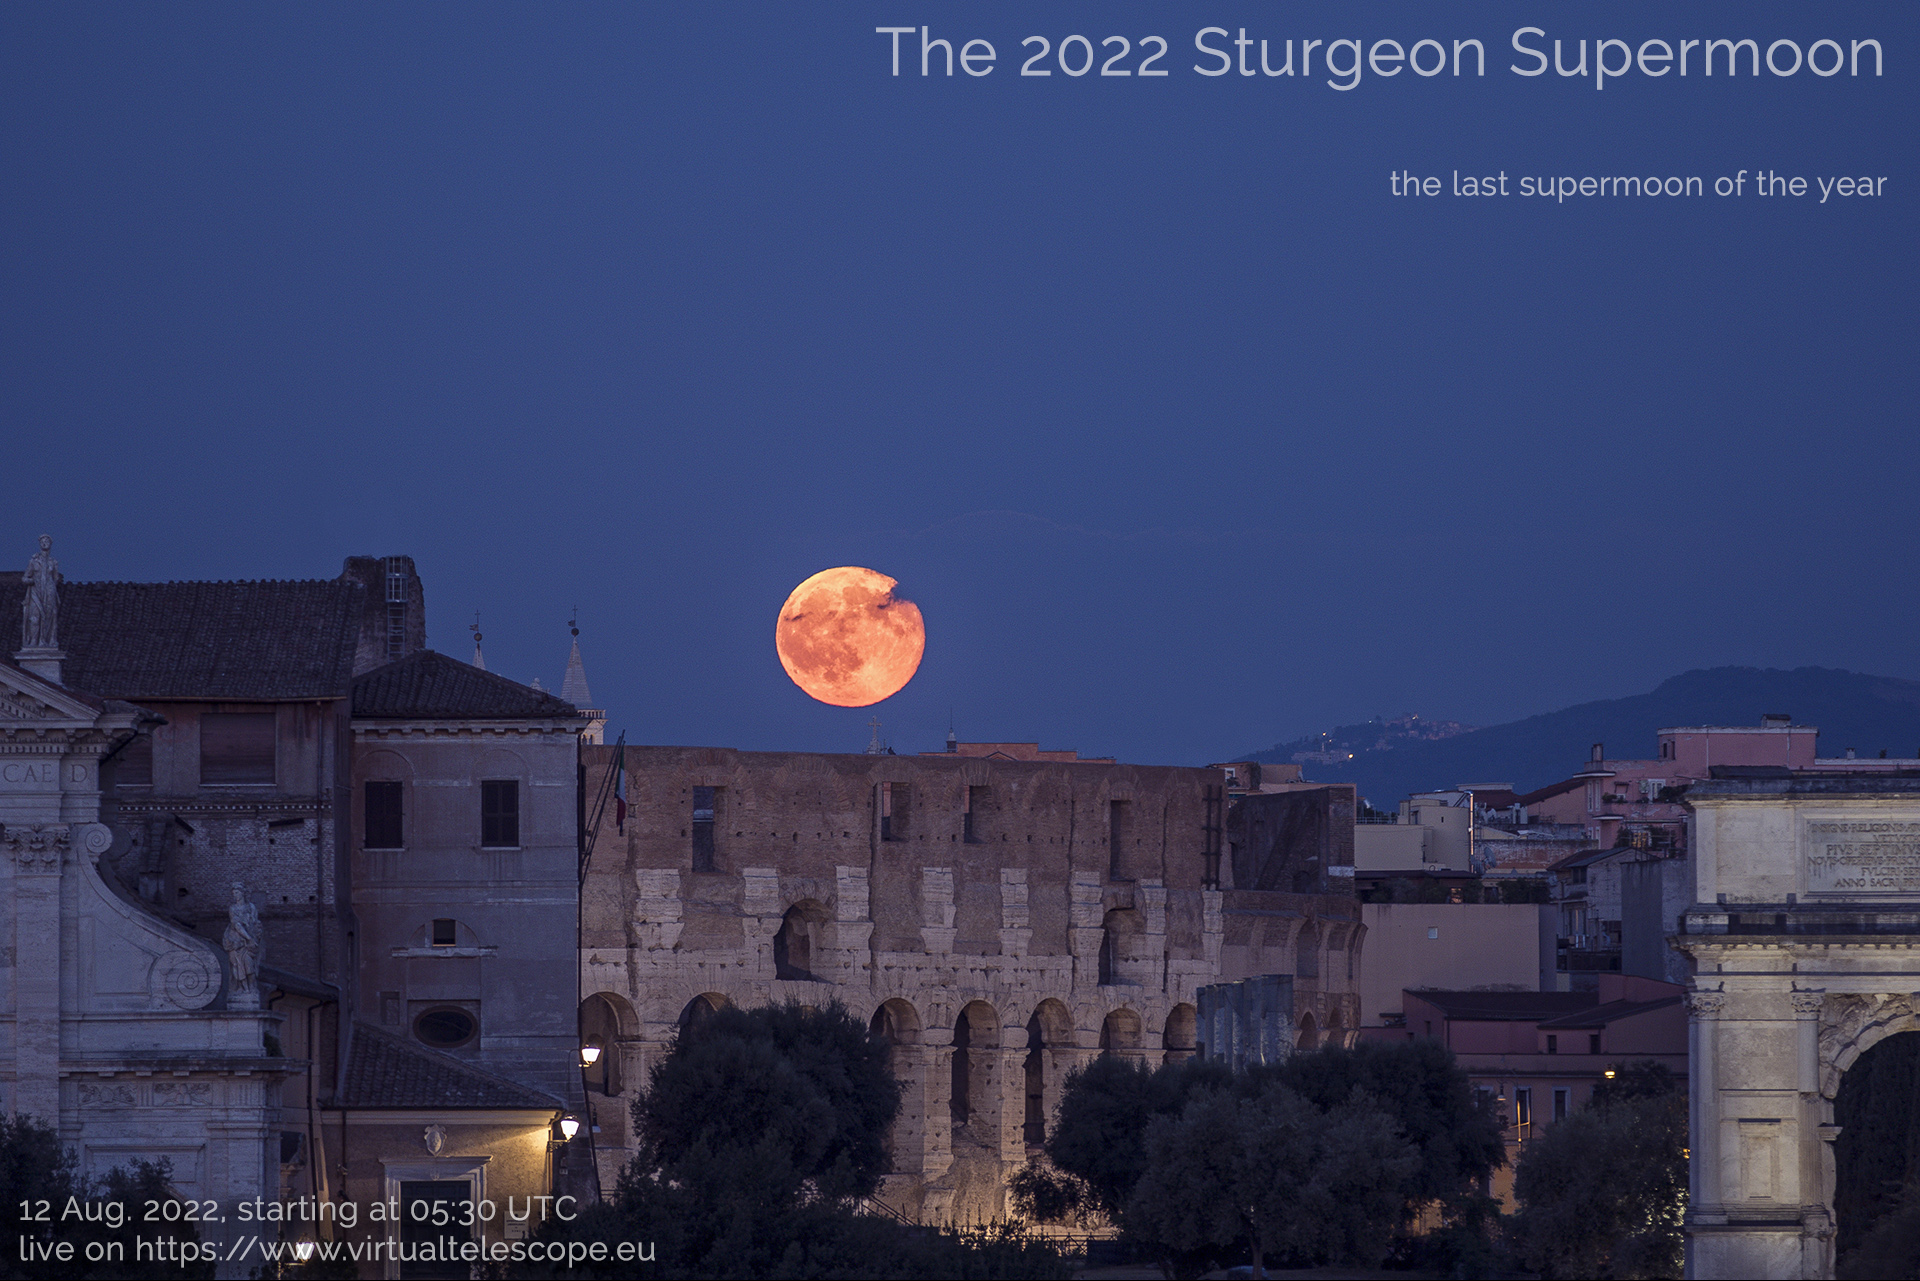 The 2022 Sturgeon Supermoon: poster of the event.